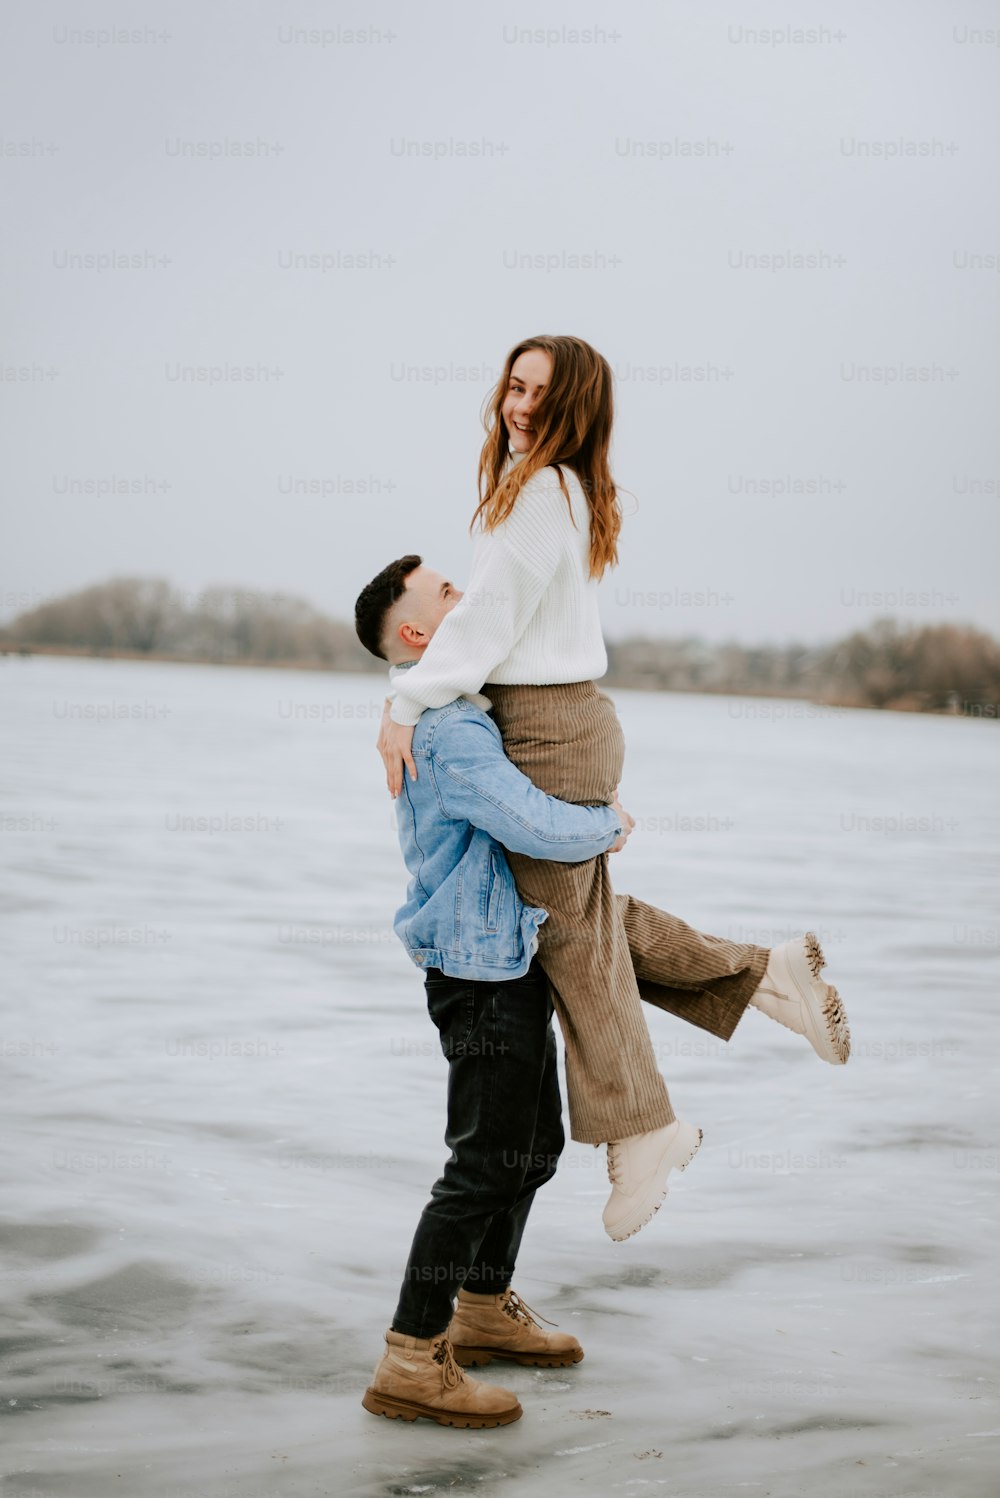 500+ Couple Goals Pictures  Download Free Images on Unsplash